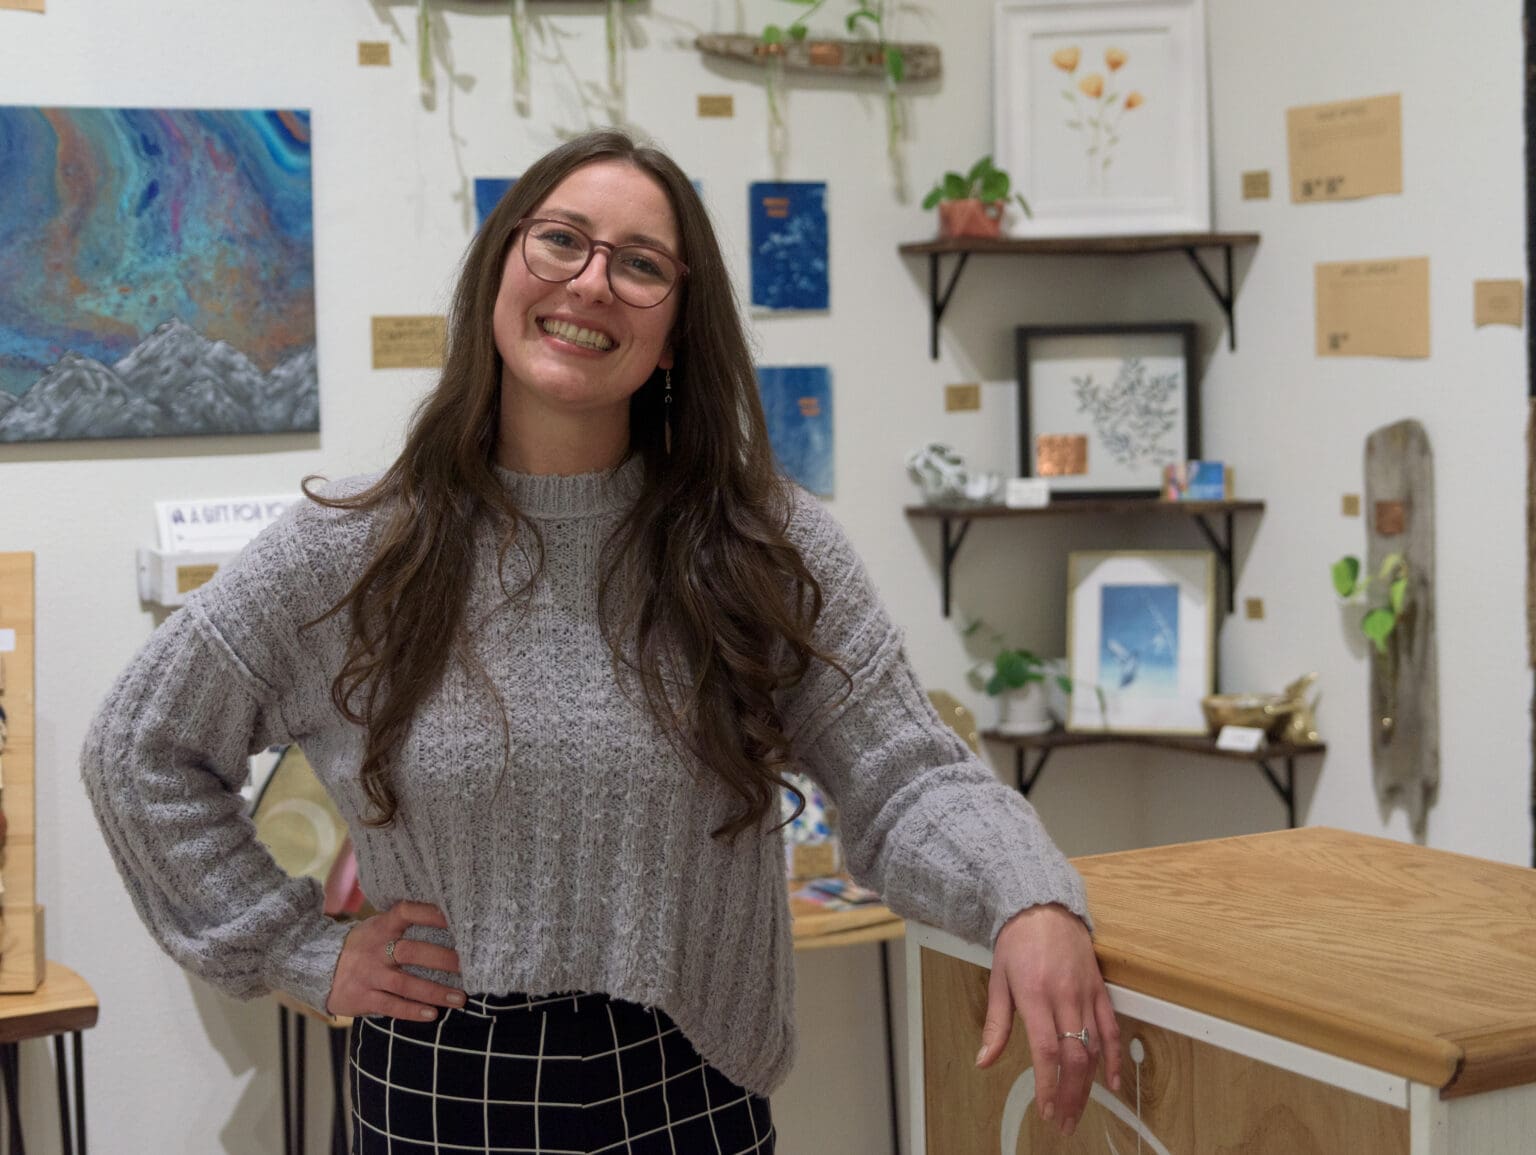 Paige Woods stands in the Heron's Nest art gallery leaning on the wooden counter as she smiles for the camera.